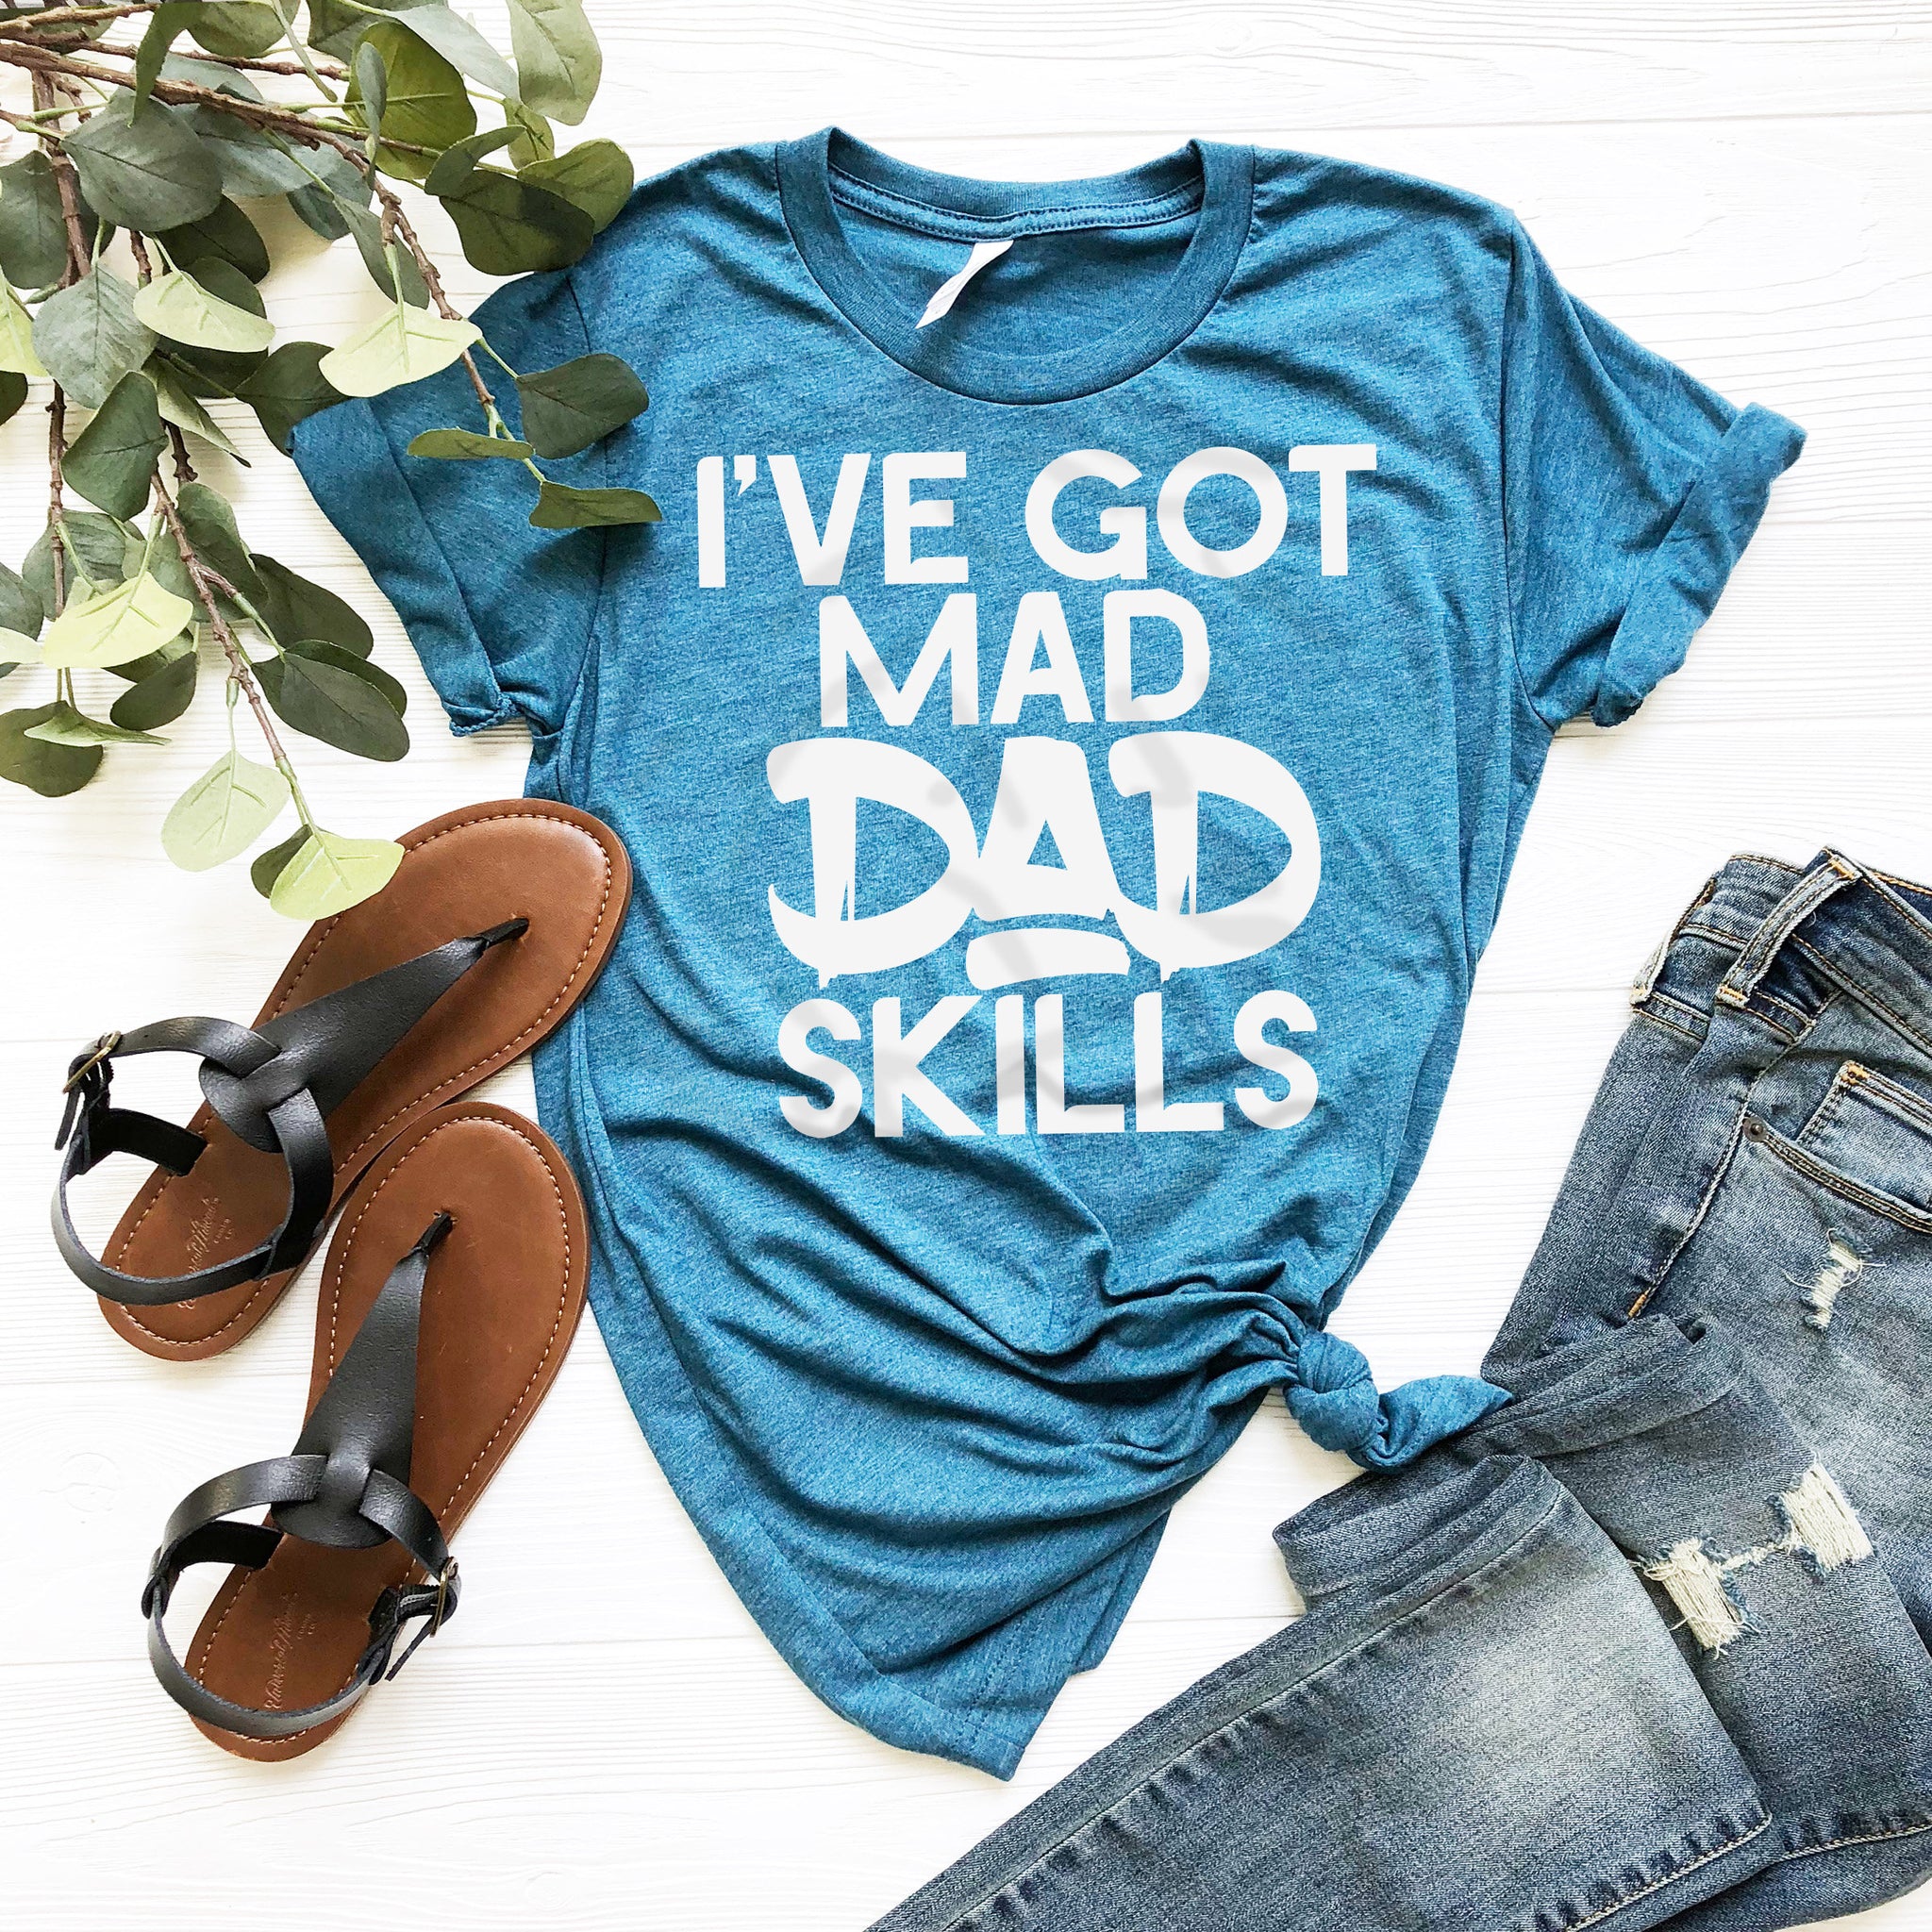 Mad Dad Skills, Funny Dad Tshirts for Fathers Day, Dad gift shirts, Dad shirts from daughter, Funny Shirts for dad men husband,Dad Birthday, - Fastdeliverytees.com